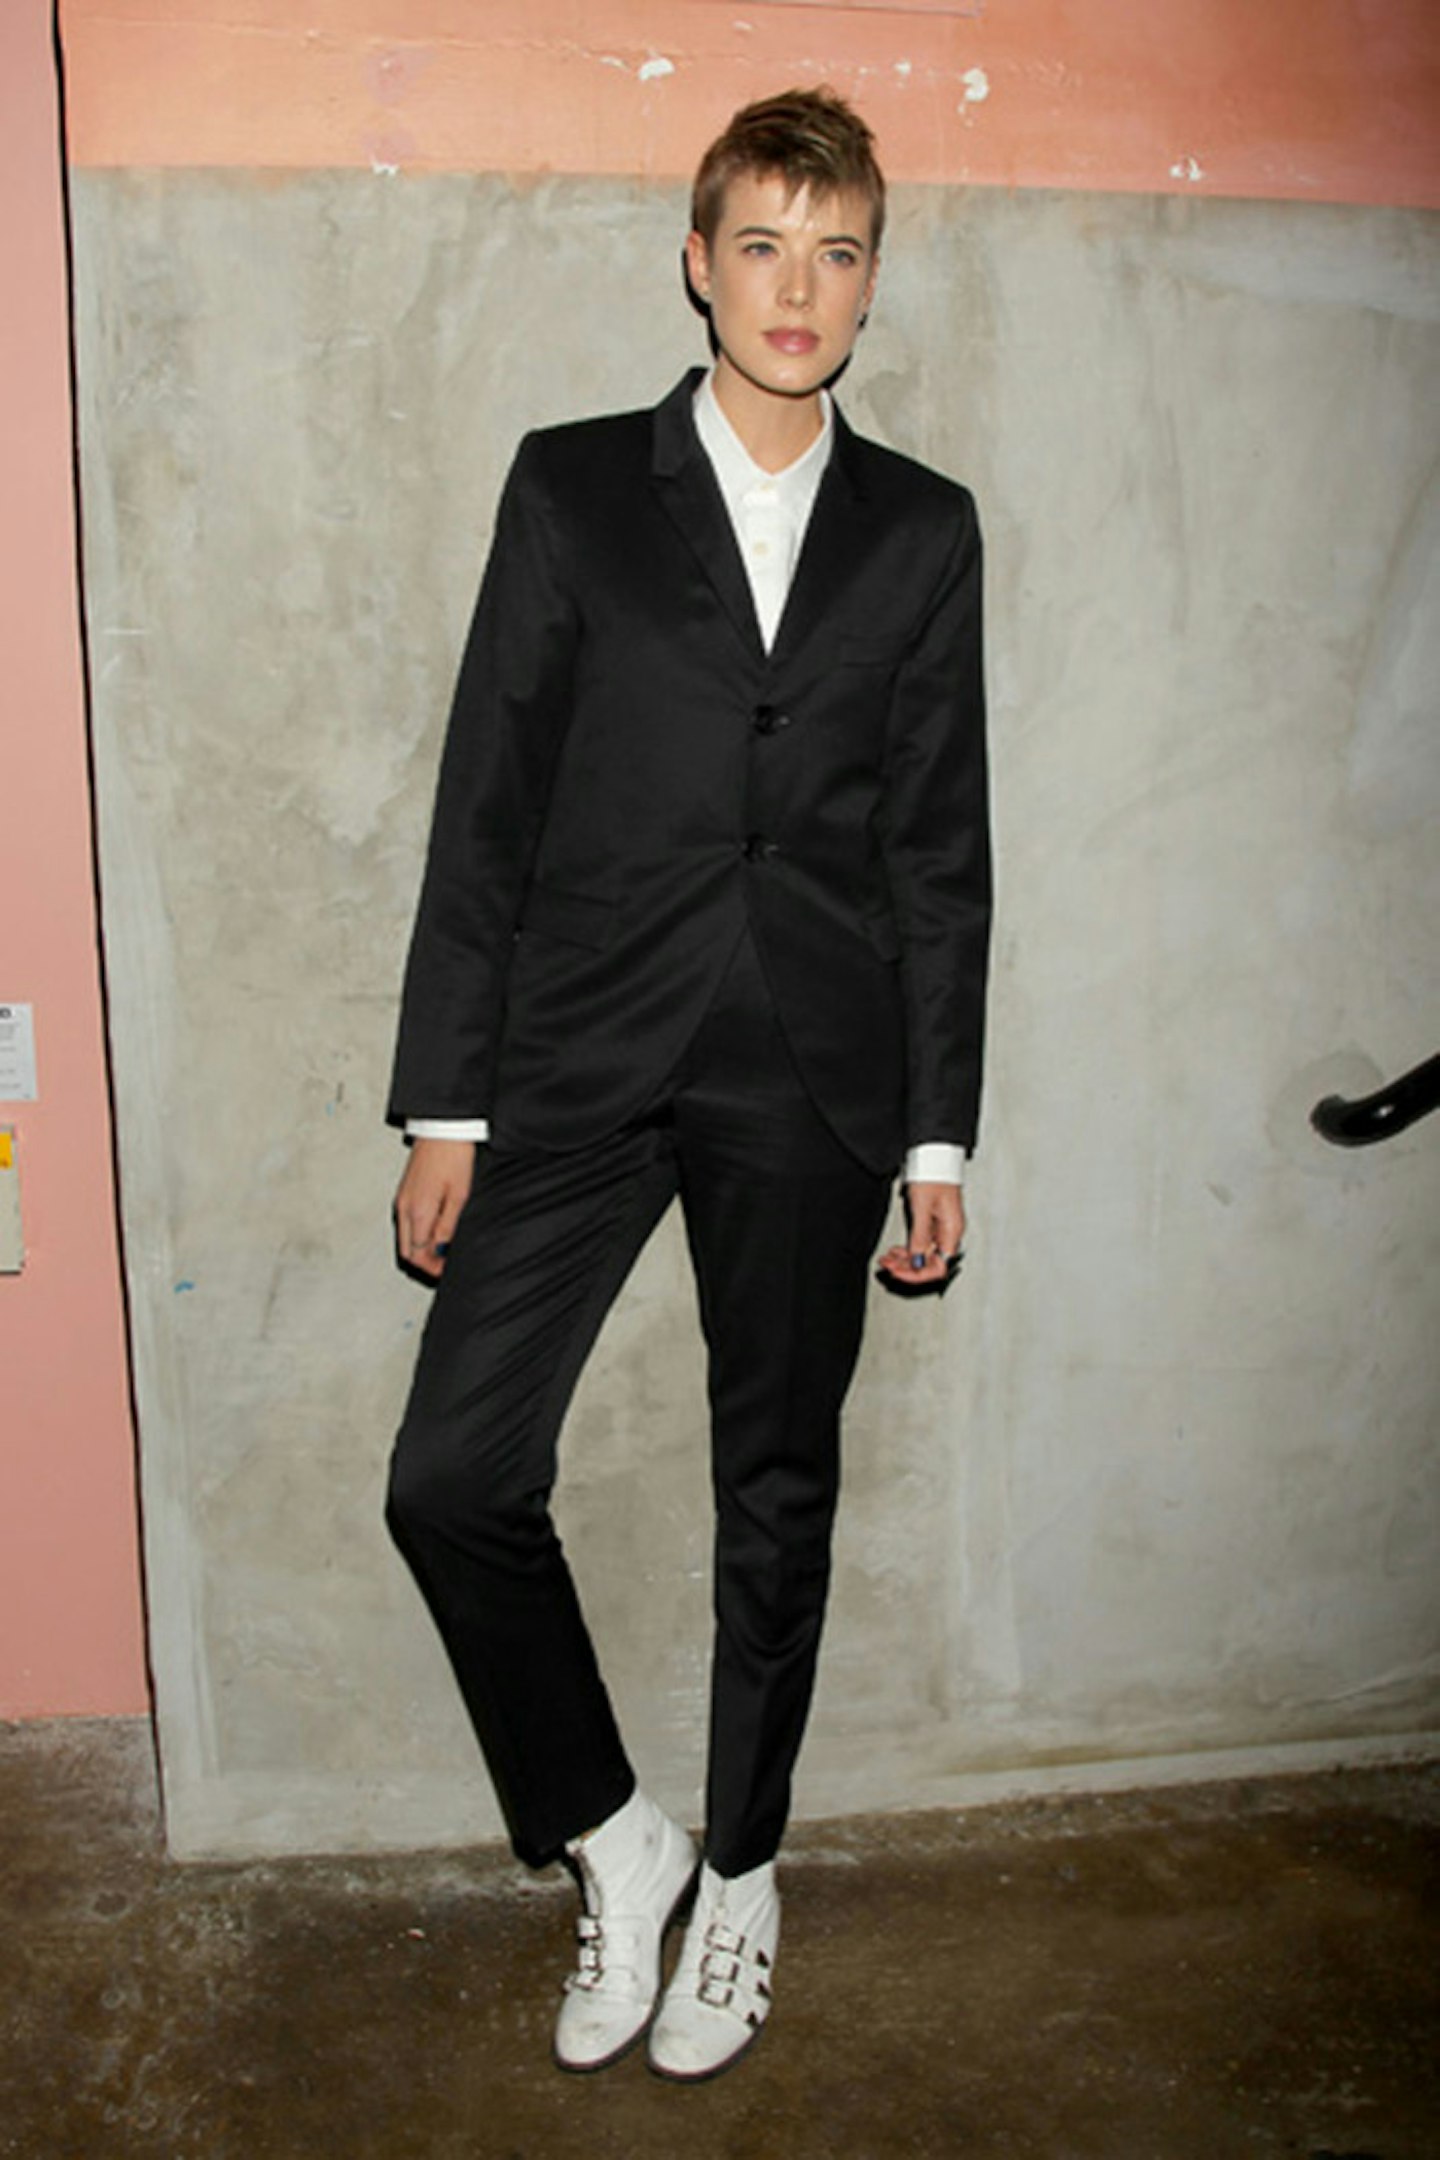 Agyness Deyn at '127 Hours' Film Premiere After Party, New York - 2 November 2010